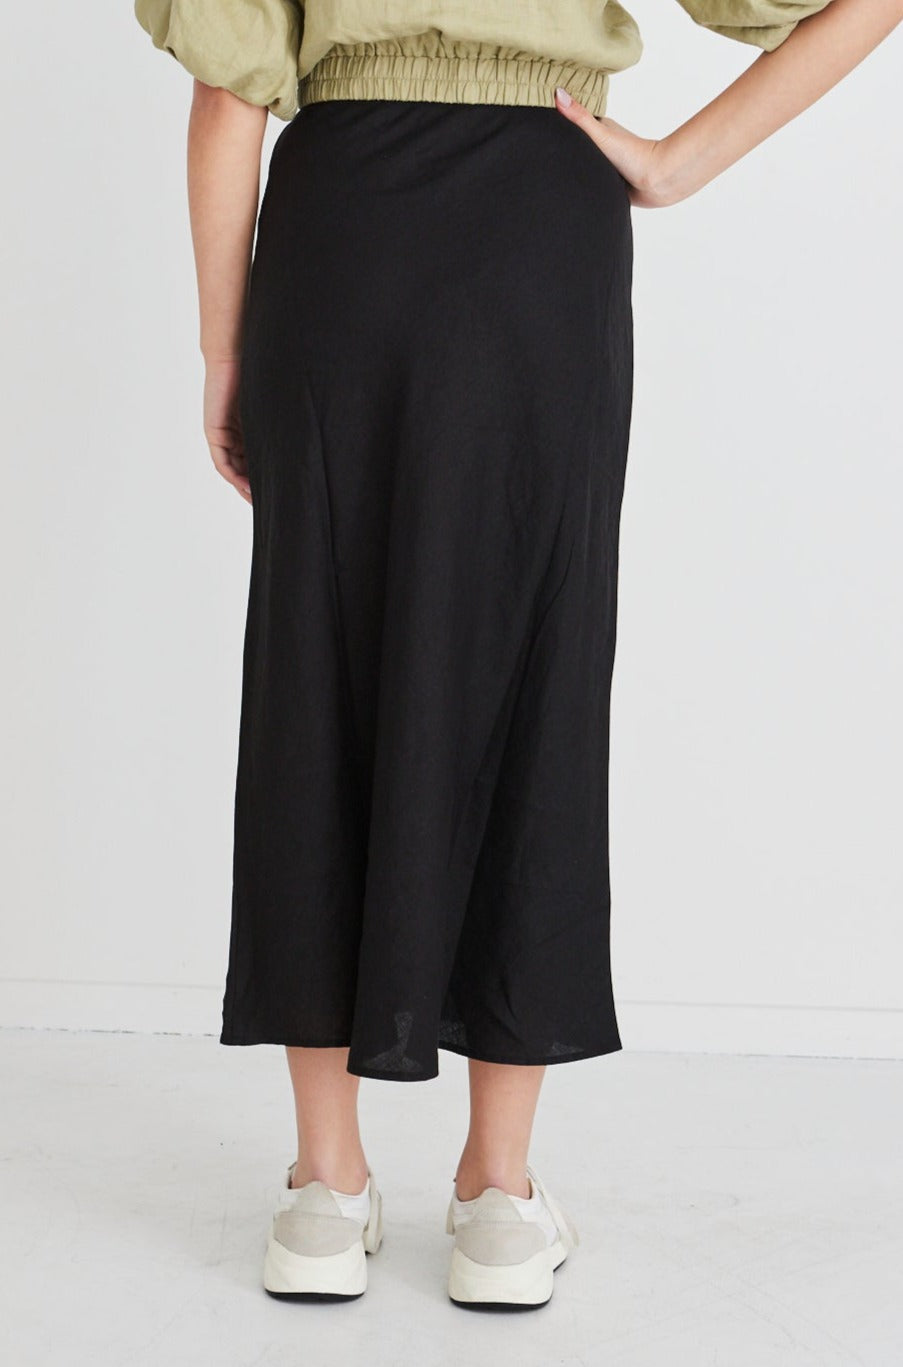 A fresh take on the classic bias midi skirt, the RE: Union skirt is 100% soft linen. A perfect transition piece from work to date night, this stunning skirt can easily be dressed up for any occasion.       Bias cut     Elasticated waist     100% Linen